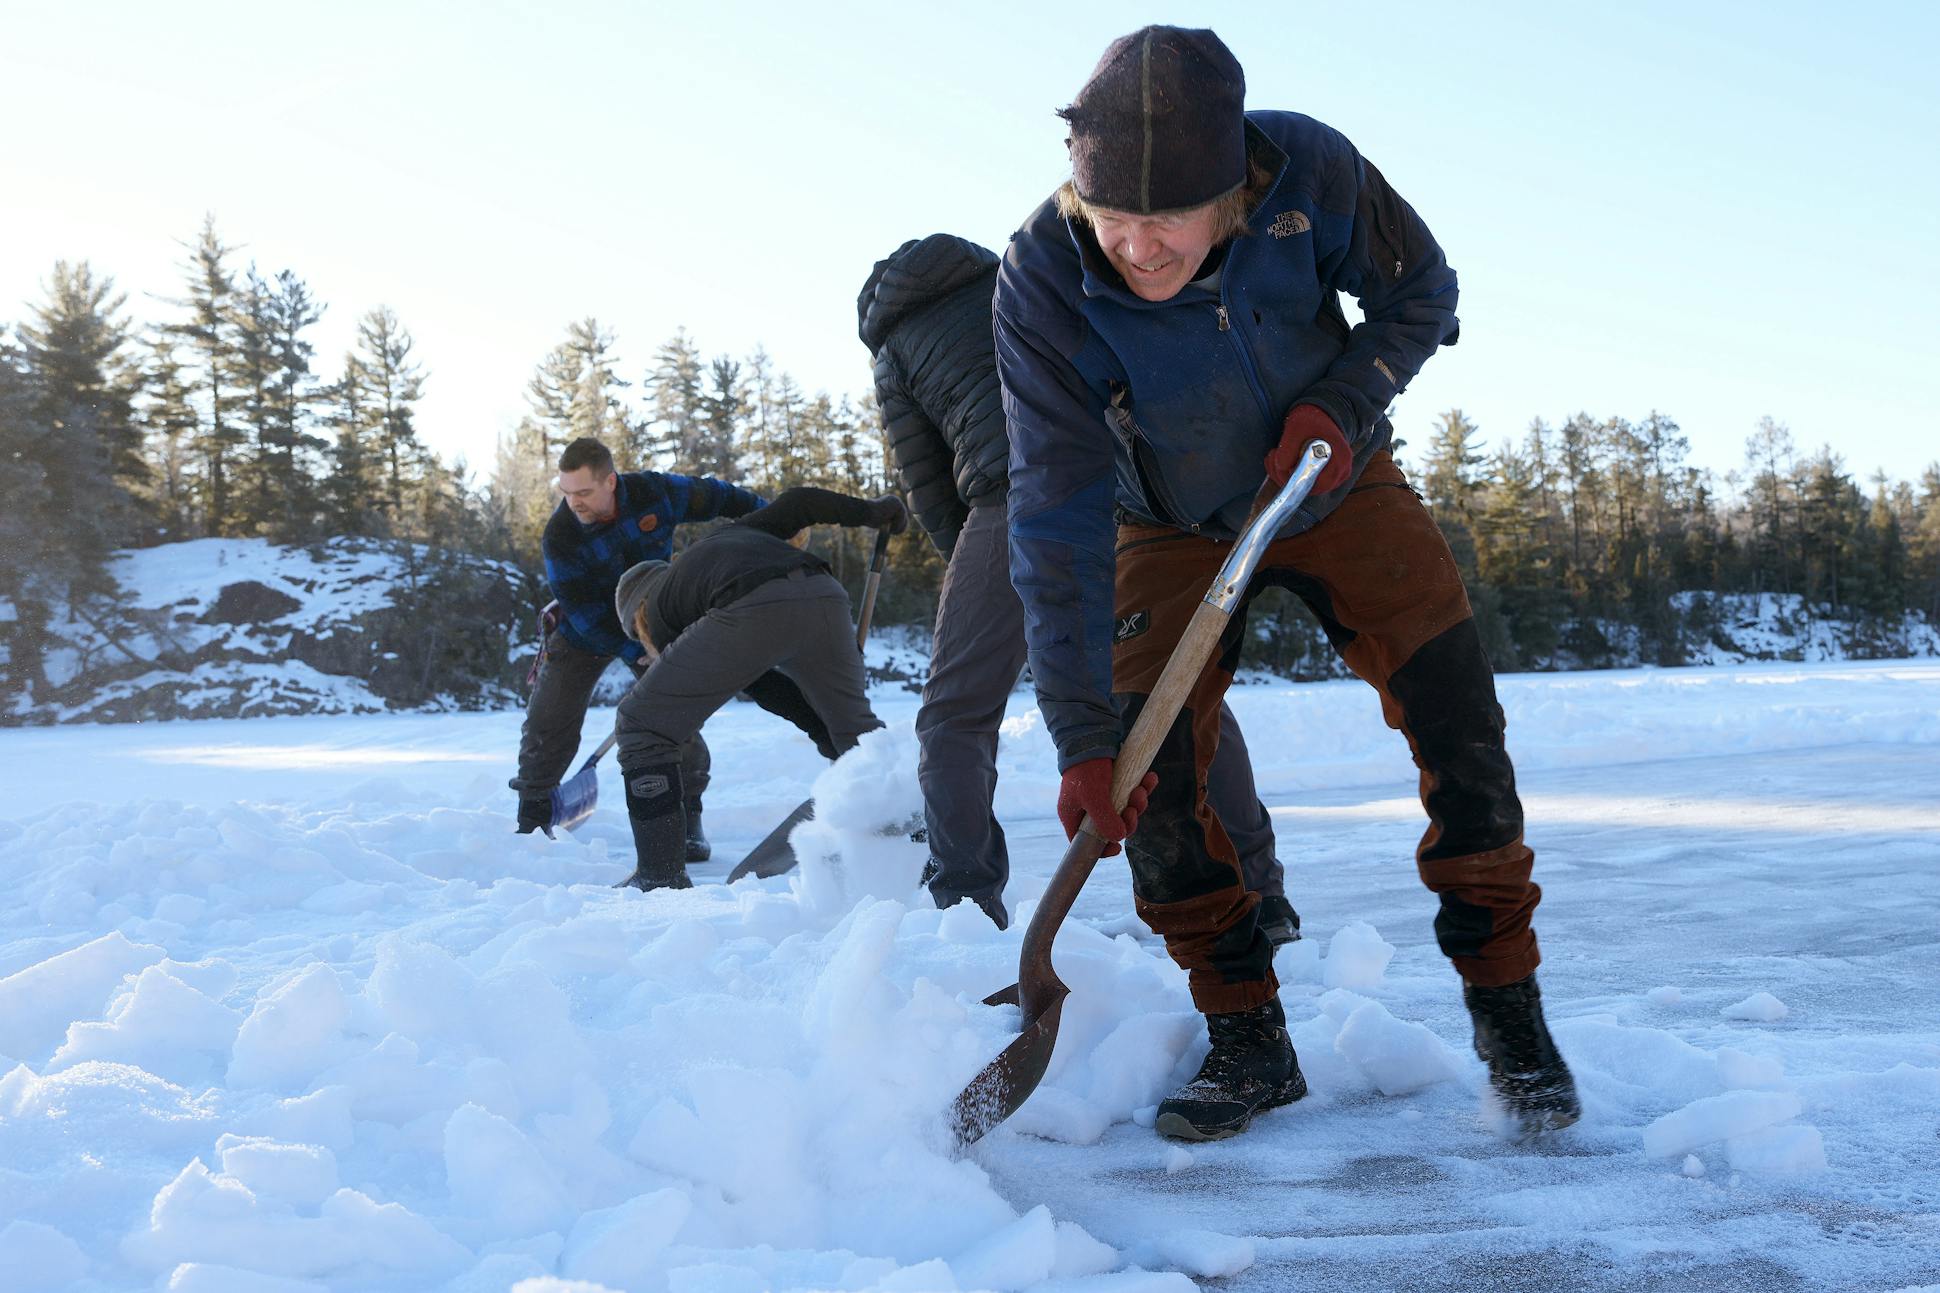 Will Steger, along with a group of friends and volunteers, shoveled snow from the ice on Pickett's Lake at his Steger Wilderness Center in preparation for the annual Ice Ball ice harvest on Feb. 3 in Ely.